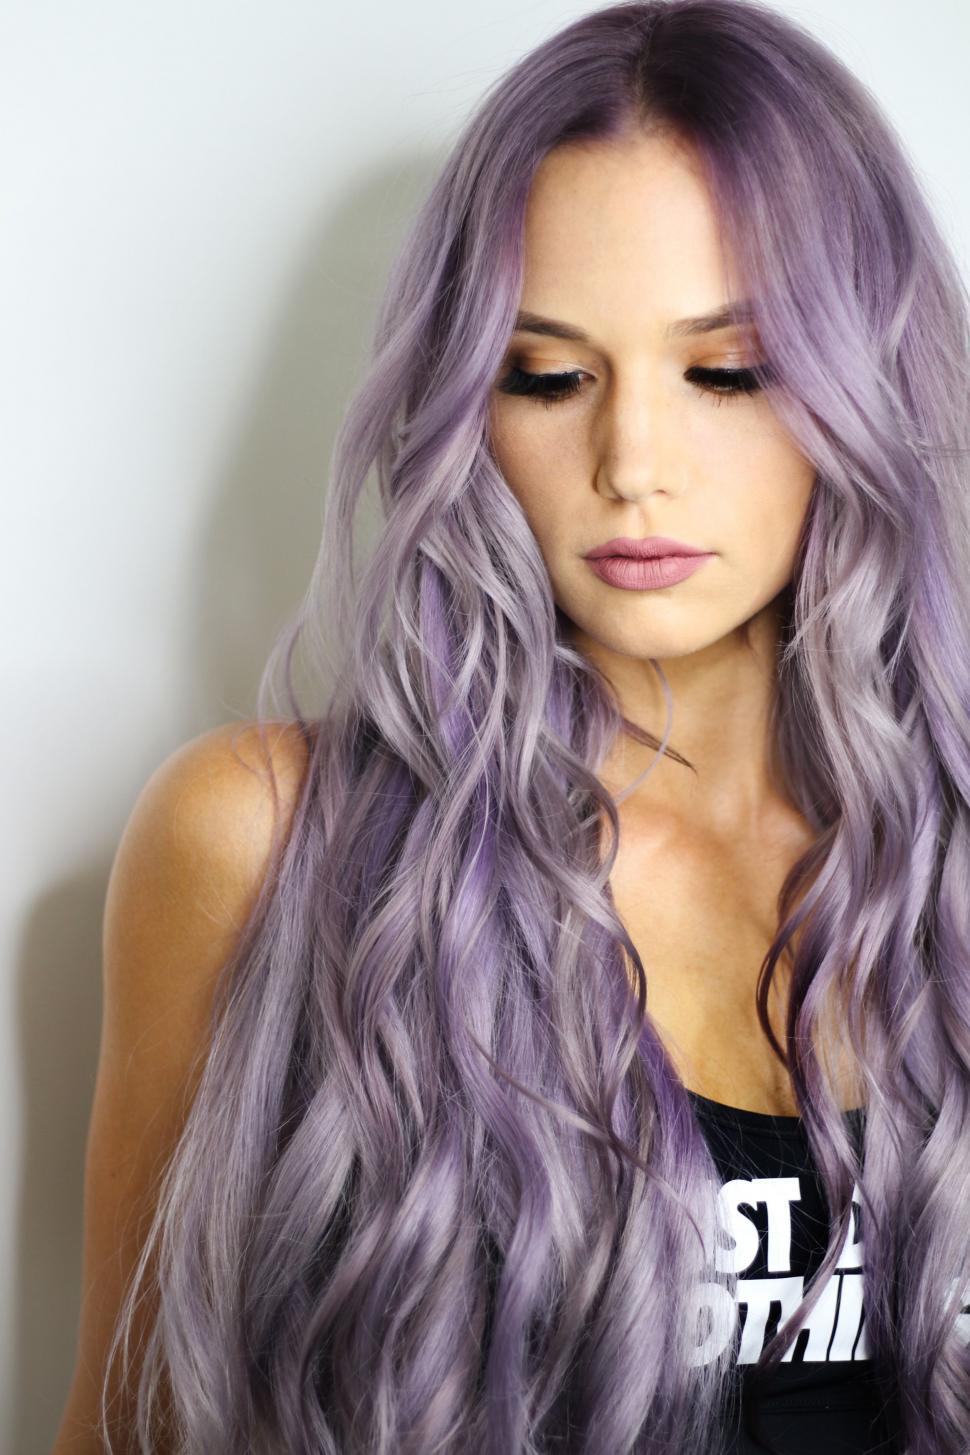 Free Image of Woman With Long Purple Hair and Black Tank Top 